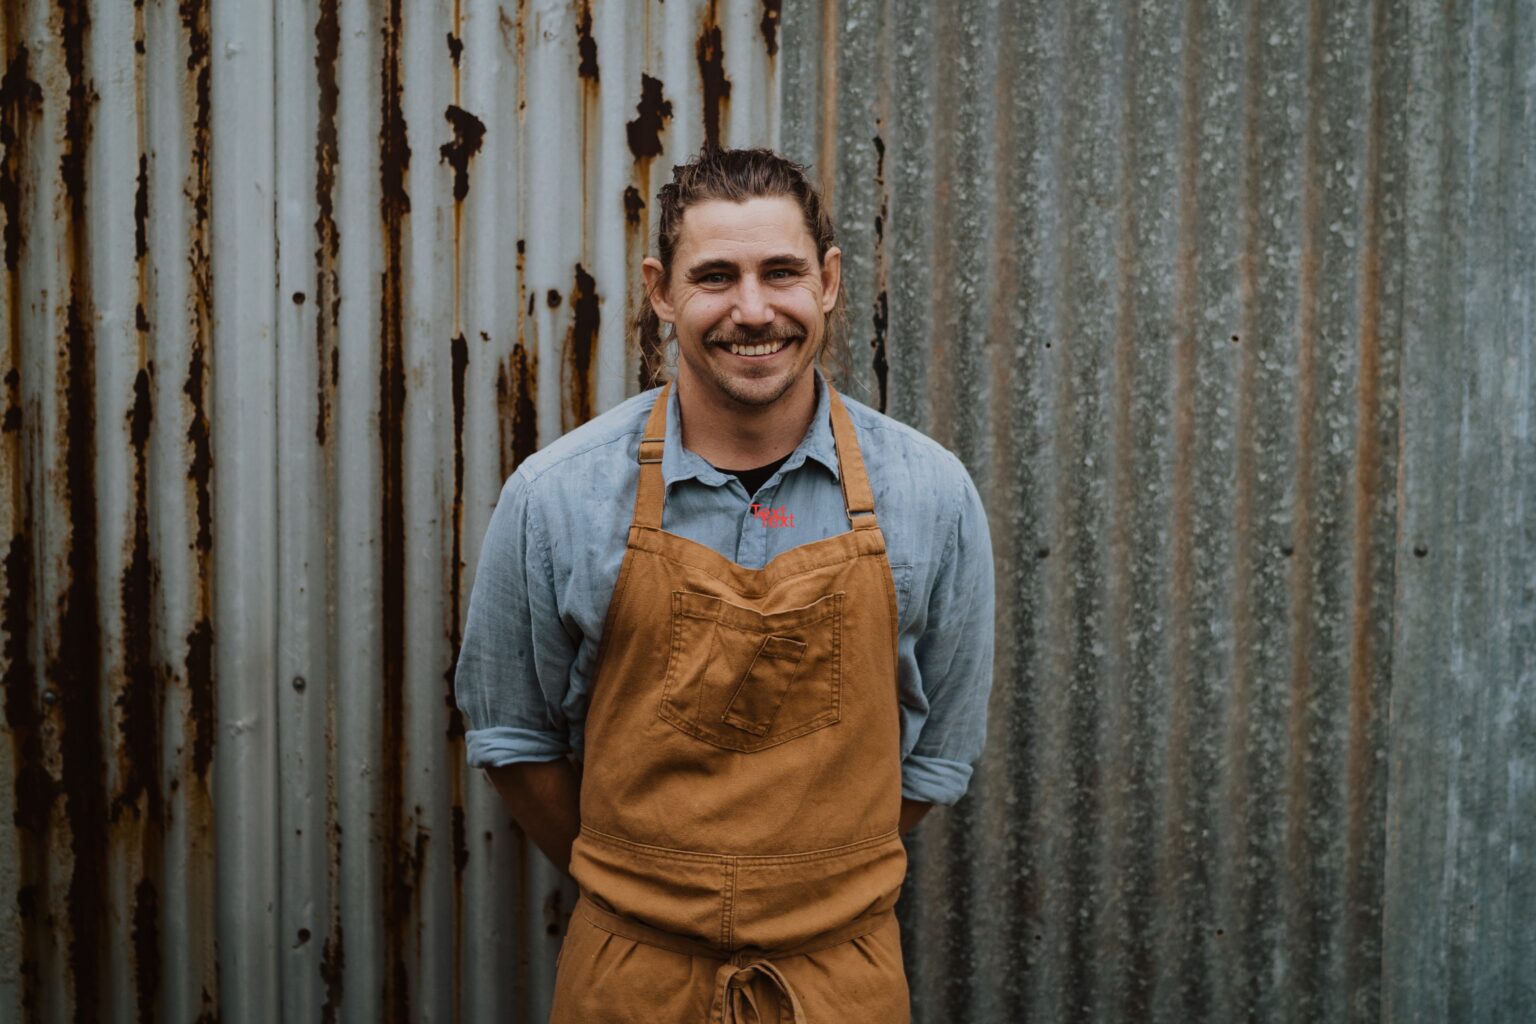 Chef Paul Iskov with a orange apron smiling in front of a corrugated iron fence discussing Pop-Up Restaurants around Western Australia - Luxury Escapes